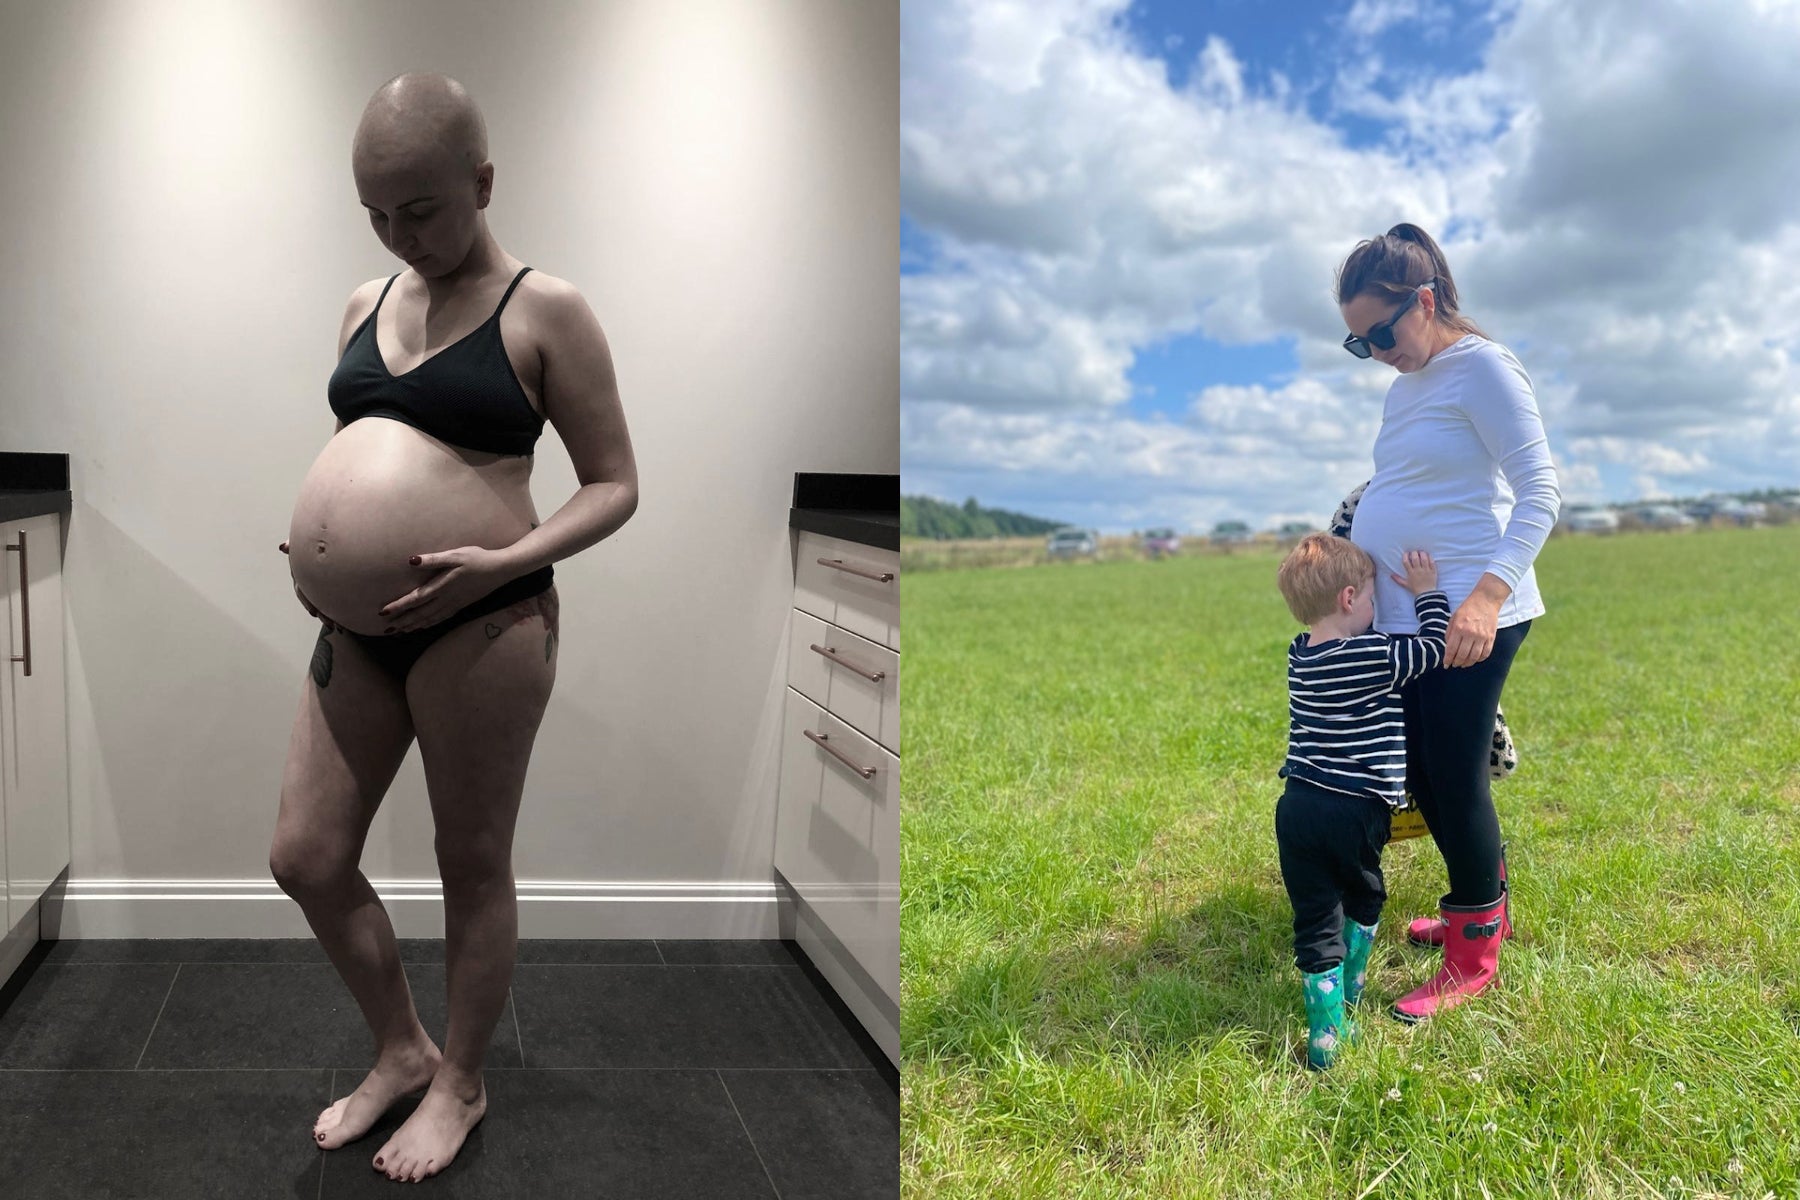 Sarah nine months pregnant after cancer treatment - and right with her child Oscar